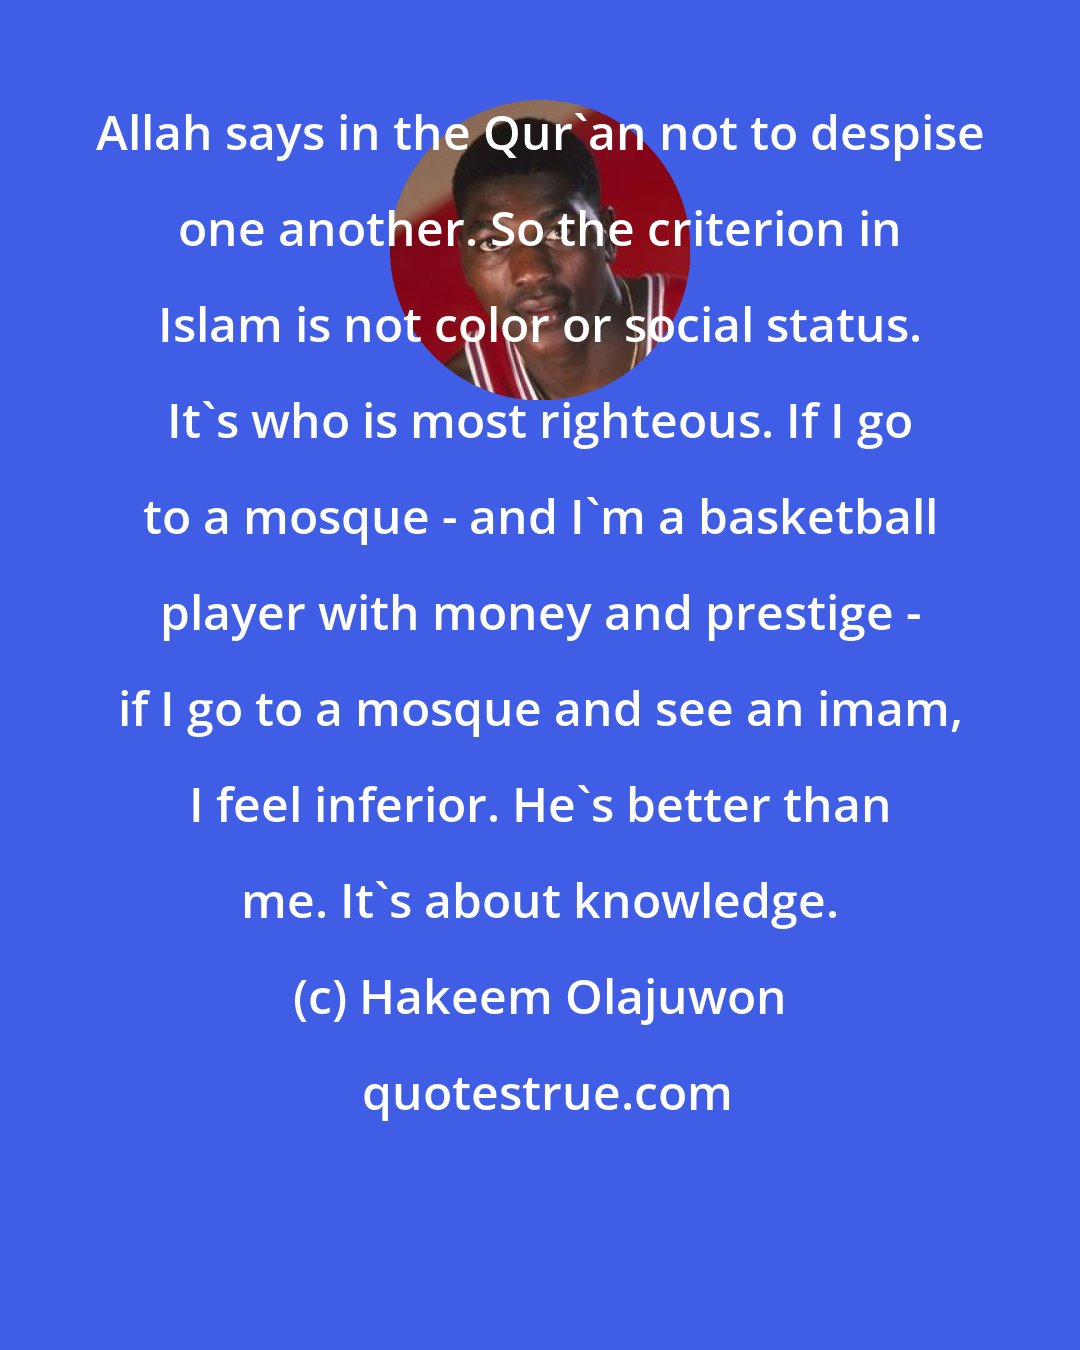 Hakeem Olajuwon: Allah says in the Qur'an not to despise one another. So the criterion in Islam is not color or social status. It's who is most righteous. If I go to a mosque - and I'm a basketball player with money and prestige - if I go to a mosque and see an imam, I feel inferior. He's better than me. It's about knowledge.